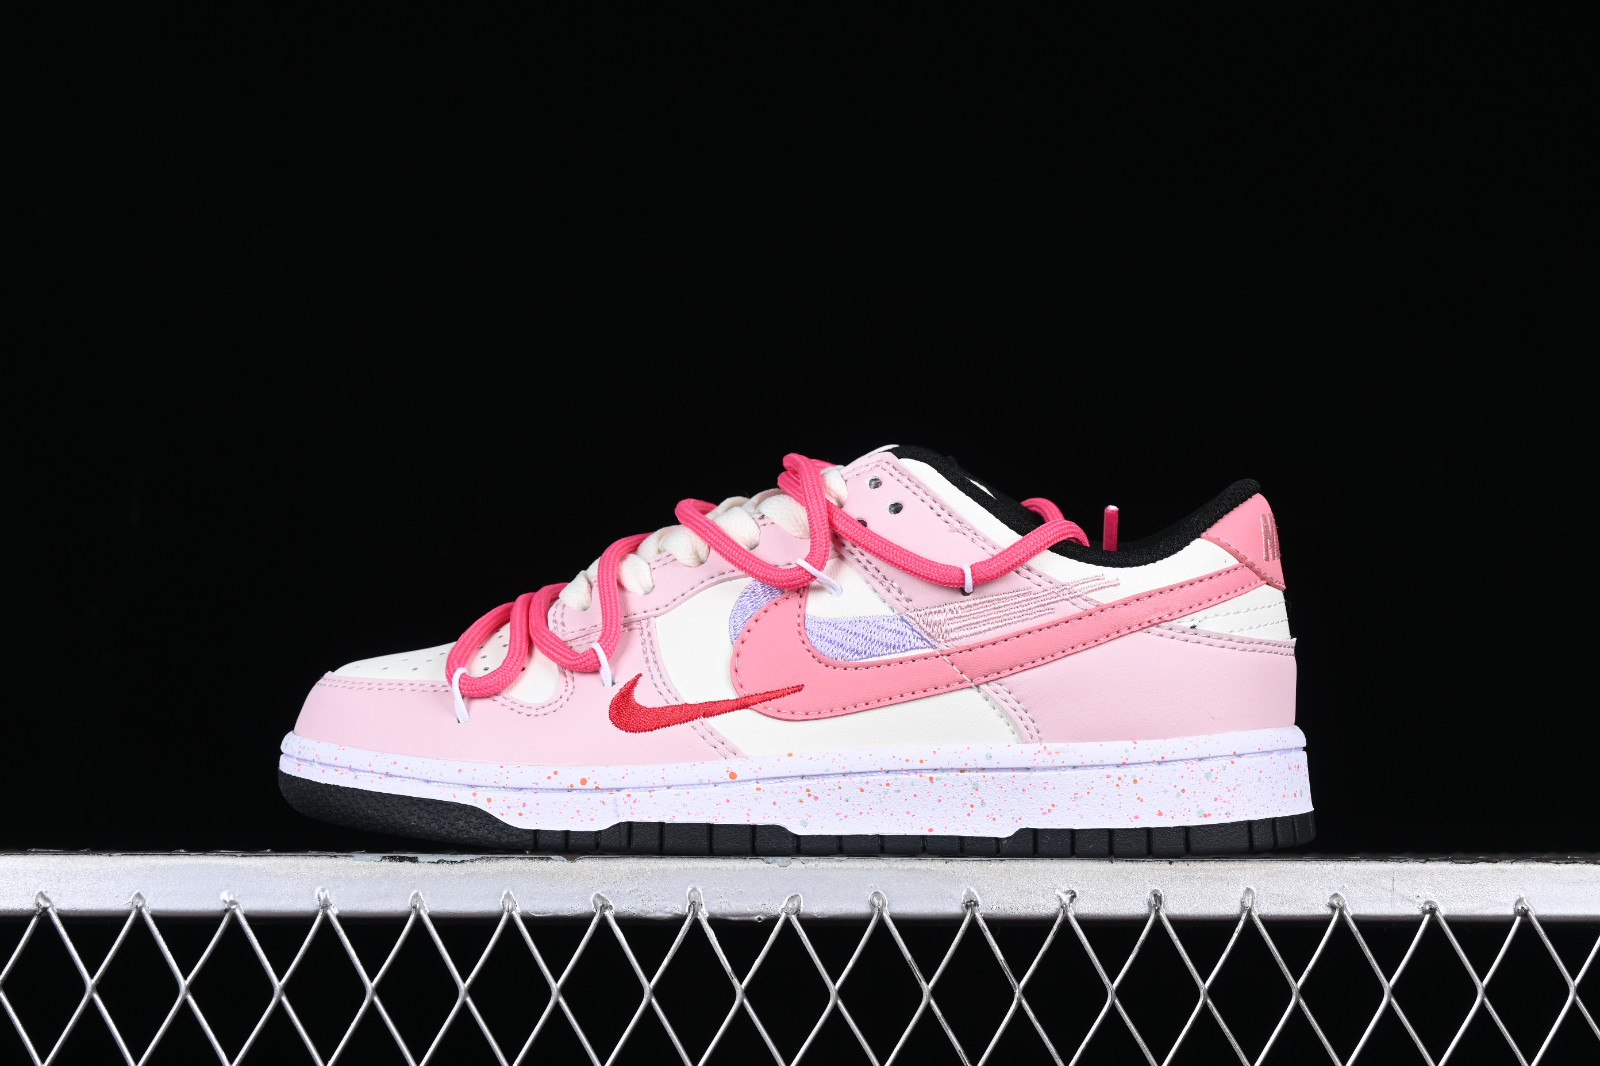 Adelaide Whirlpool Gedragen nike air zoom dynamic tr womens sandals boots - Nike SB Dunk Low White  Black Rose Pink Purple FD4623 - Ariss-euShops - 131